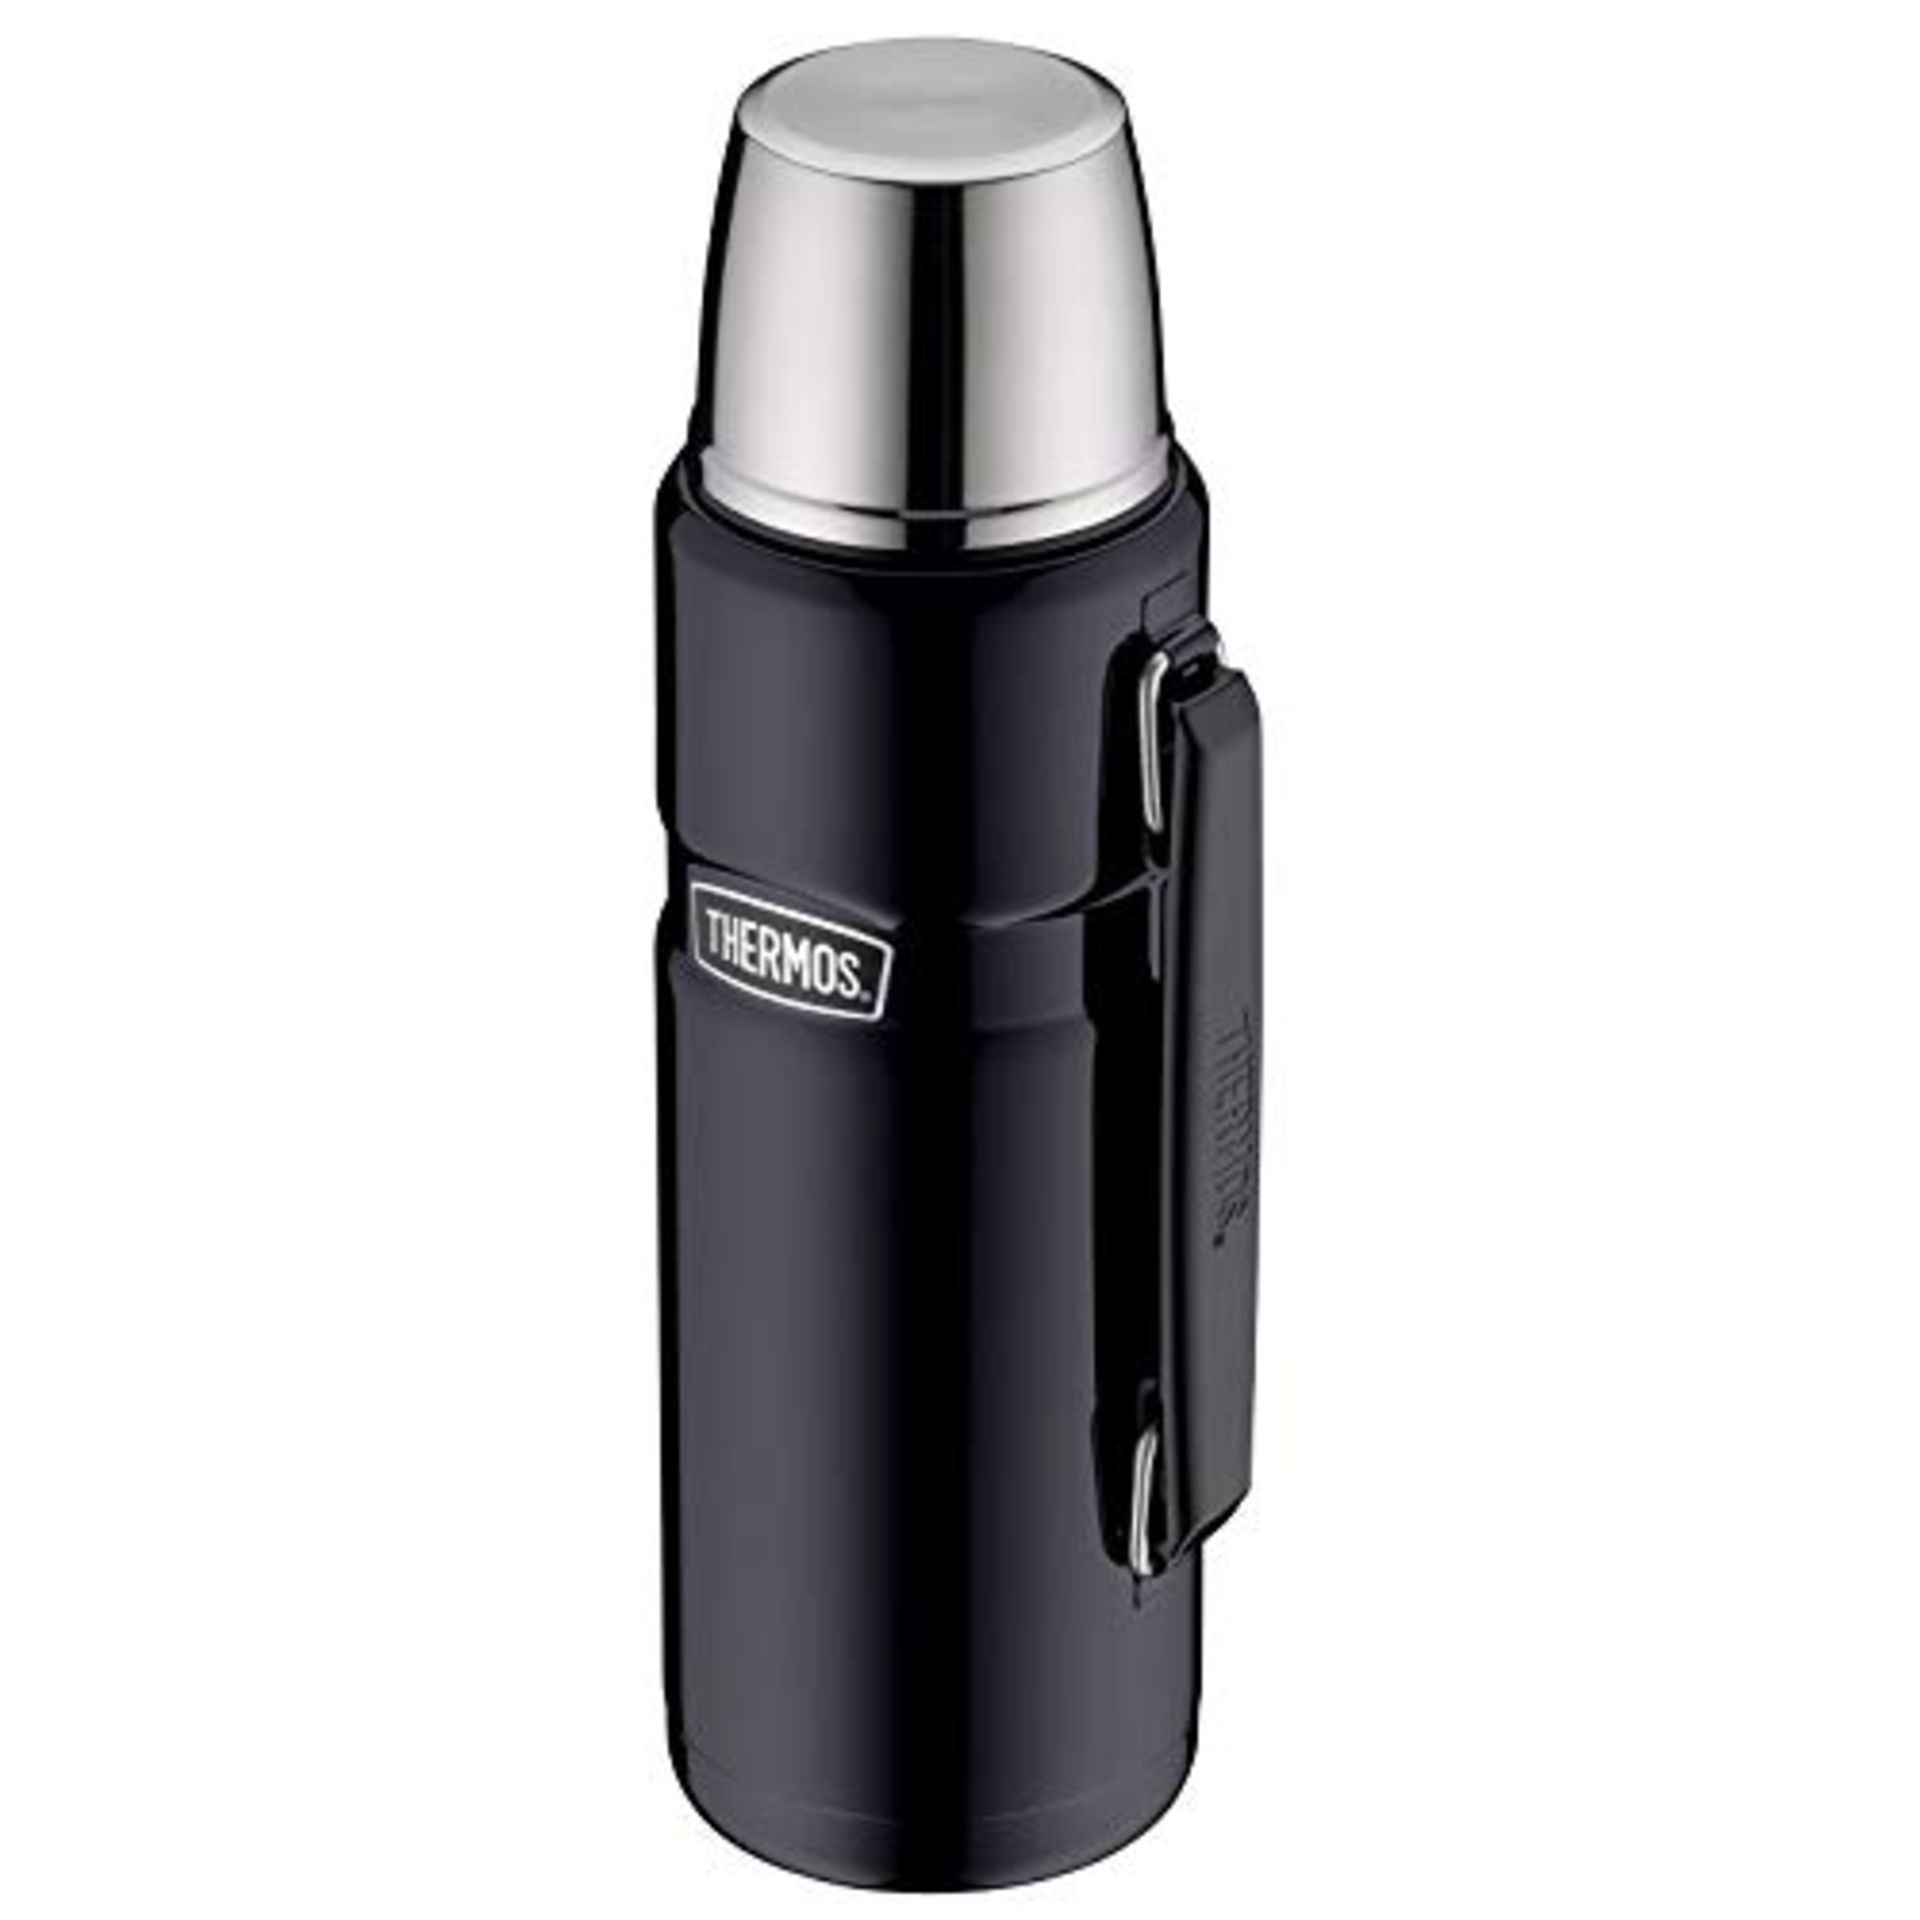 Thermos Stainless King Flask, Midnight Blue, 1.2 L, 33.6 x 11.99 x 33.6 cm, 183267